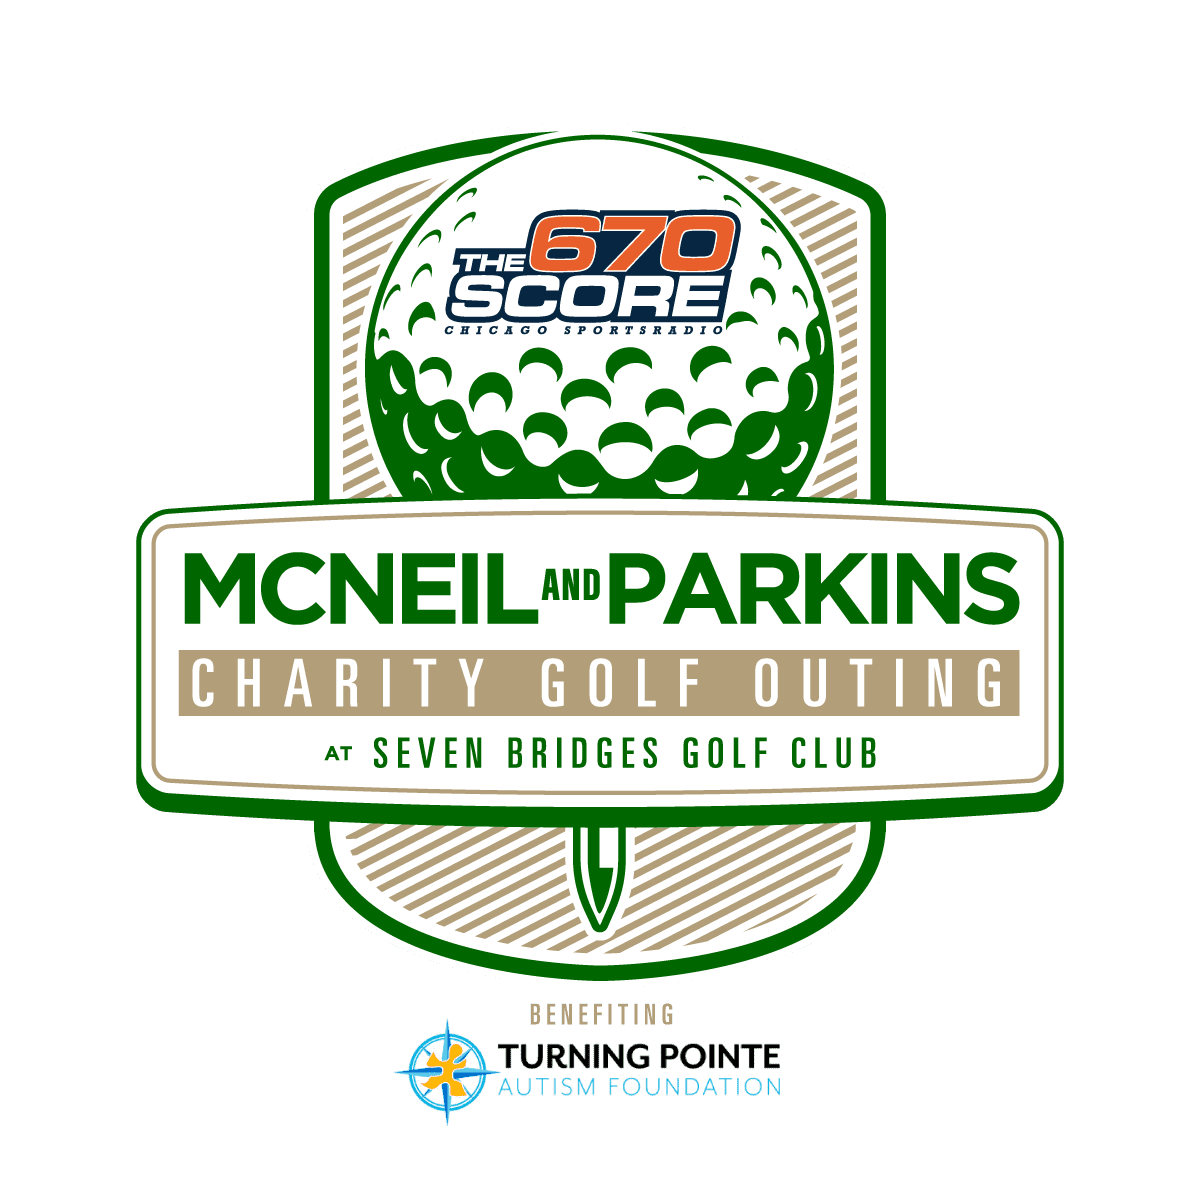 McNeil and Parkins Charity Golf Outing